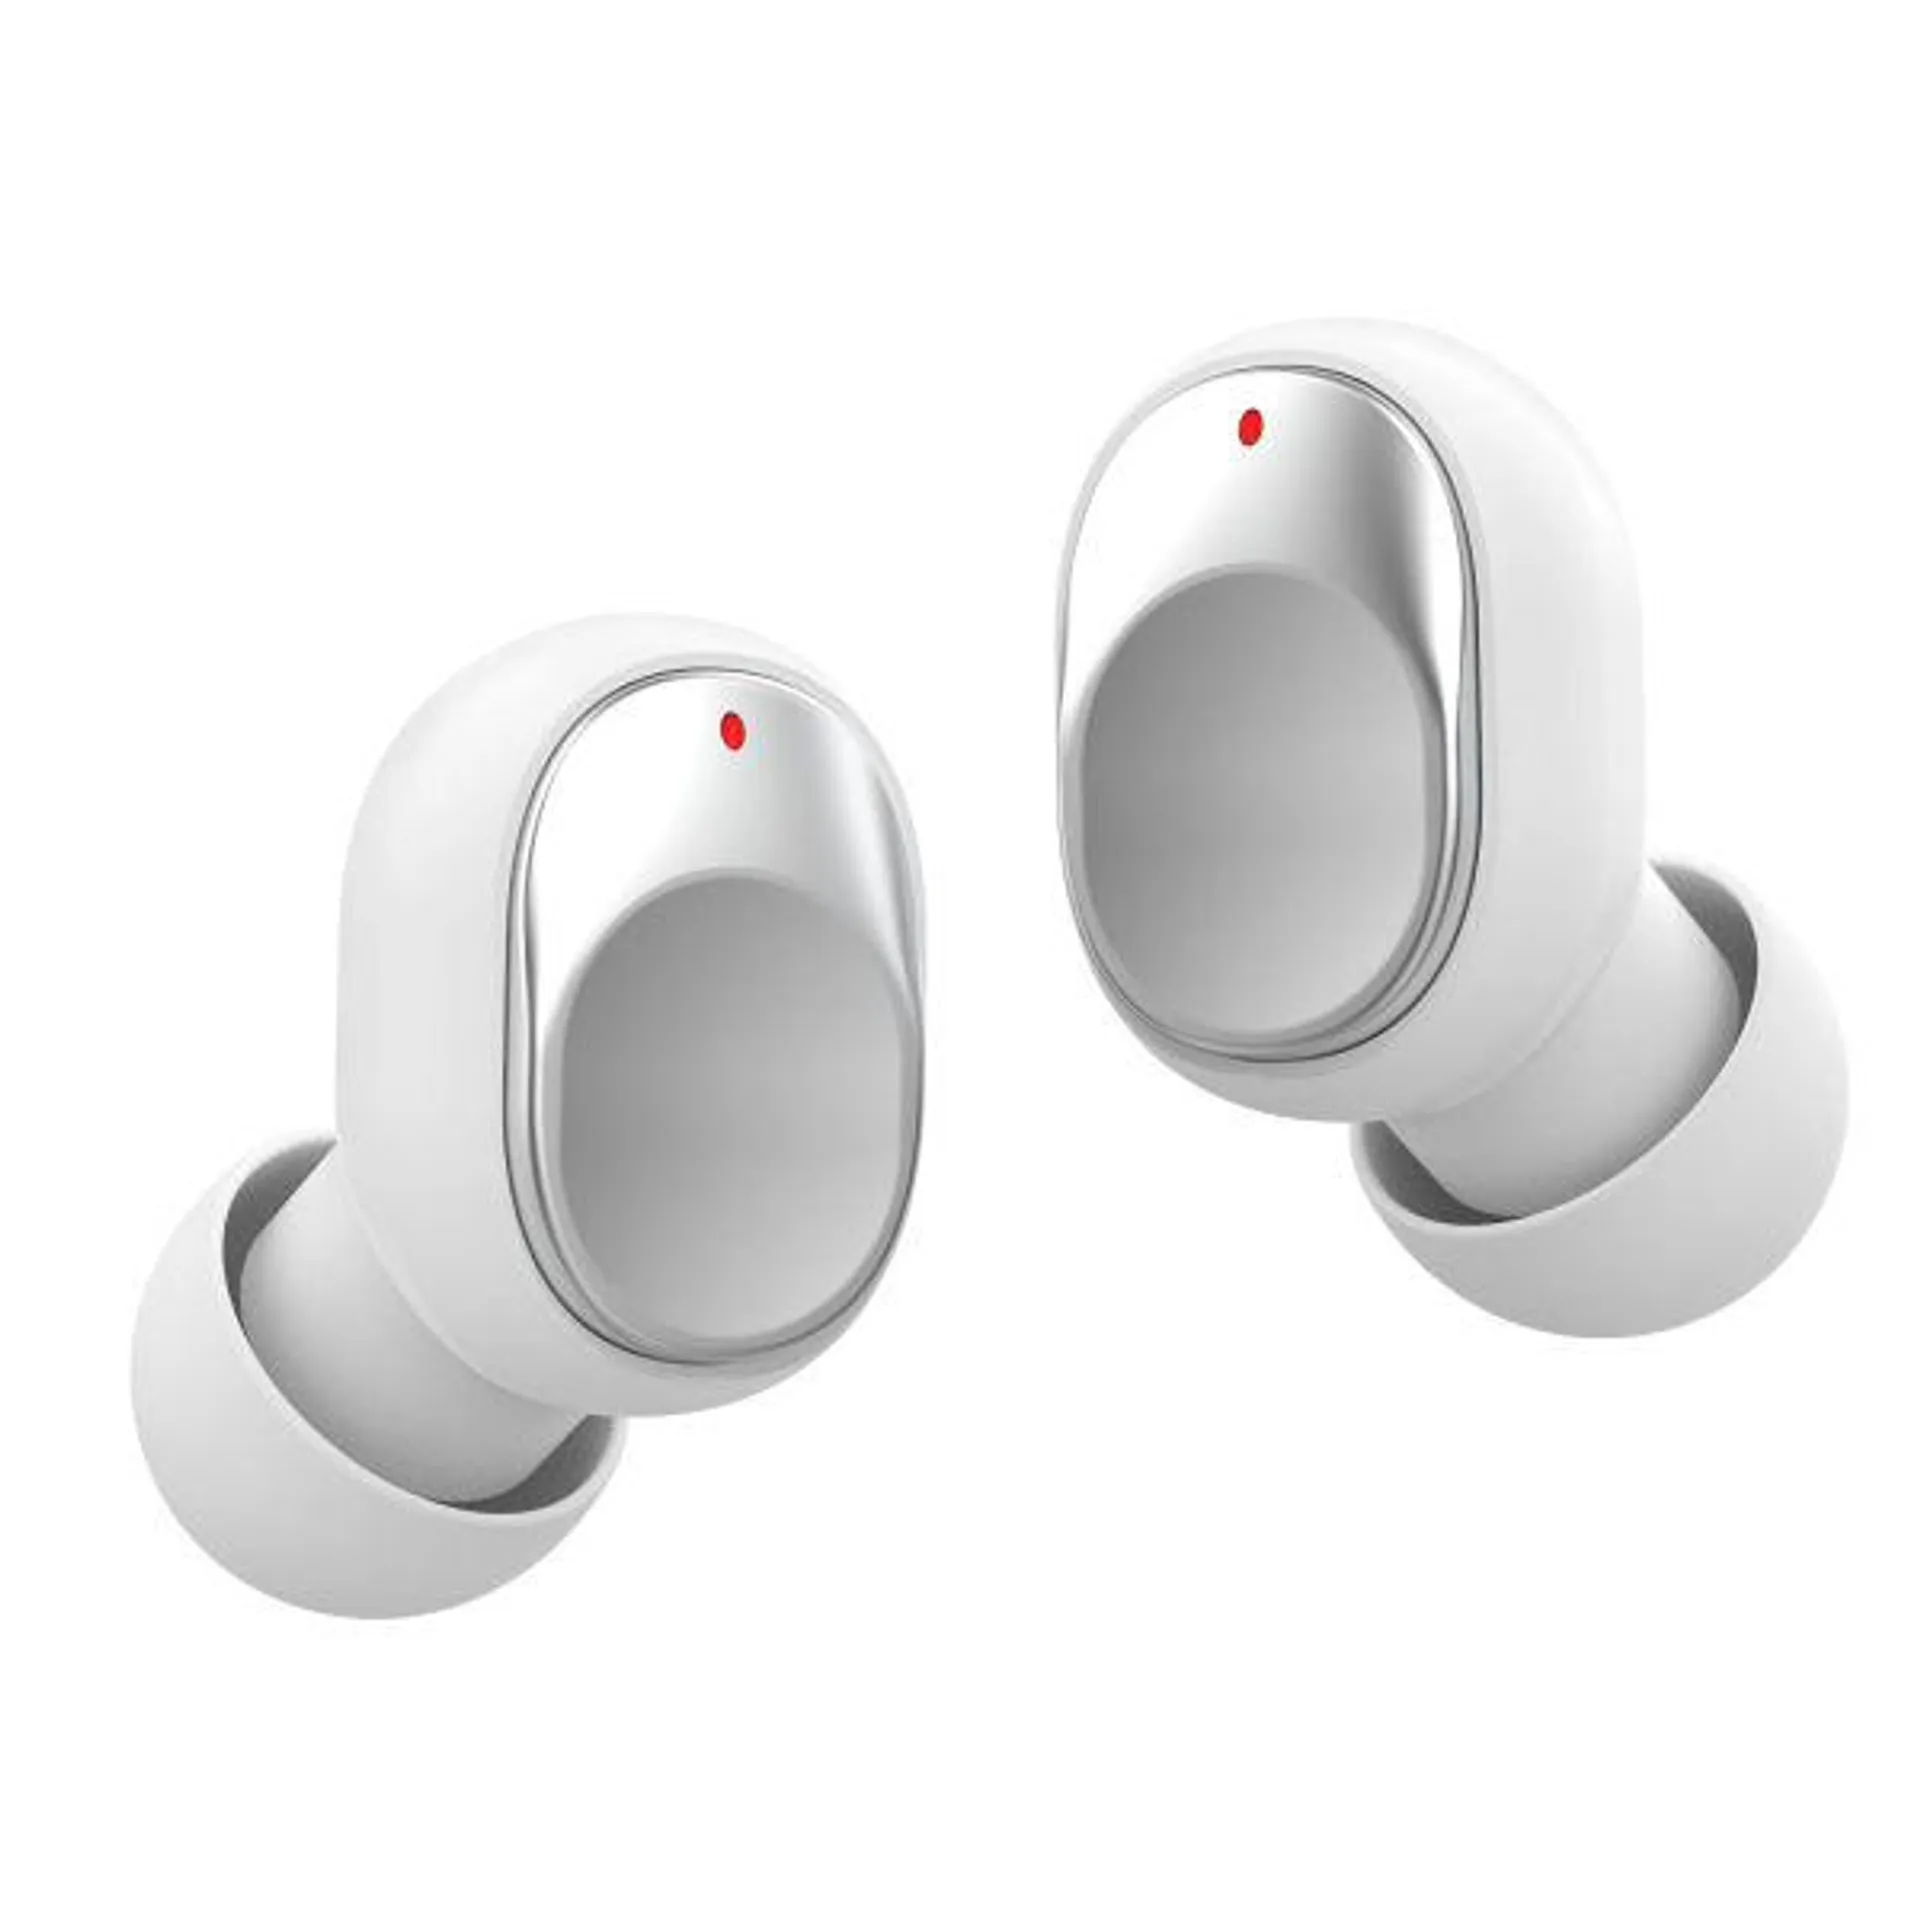 Audiomate True Wireless Earphone with Charging Case - White